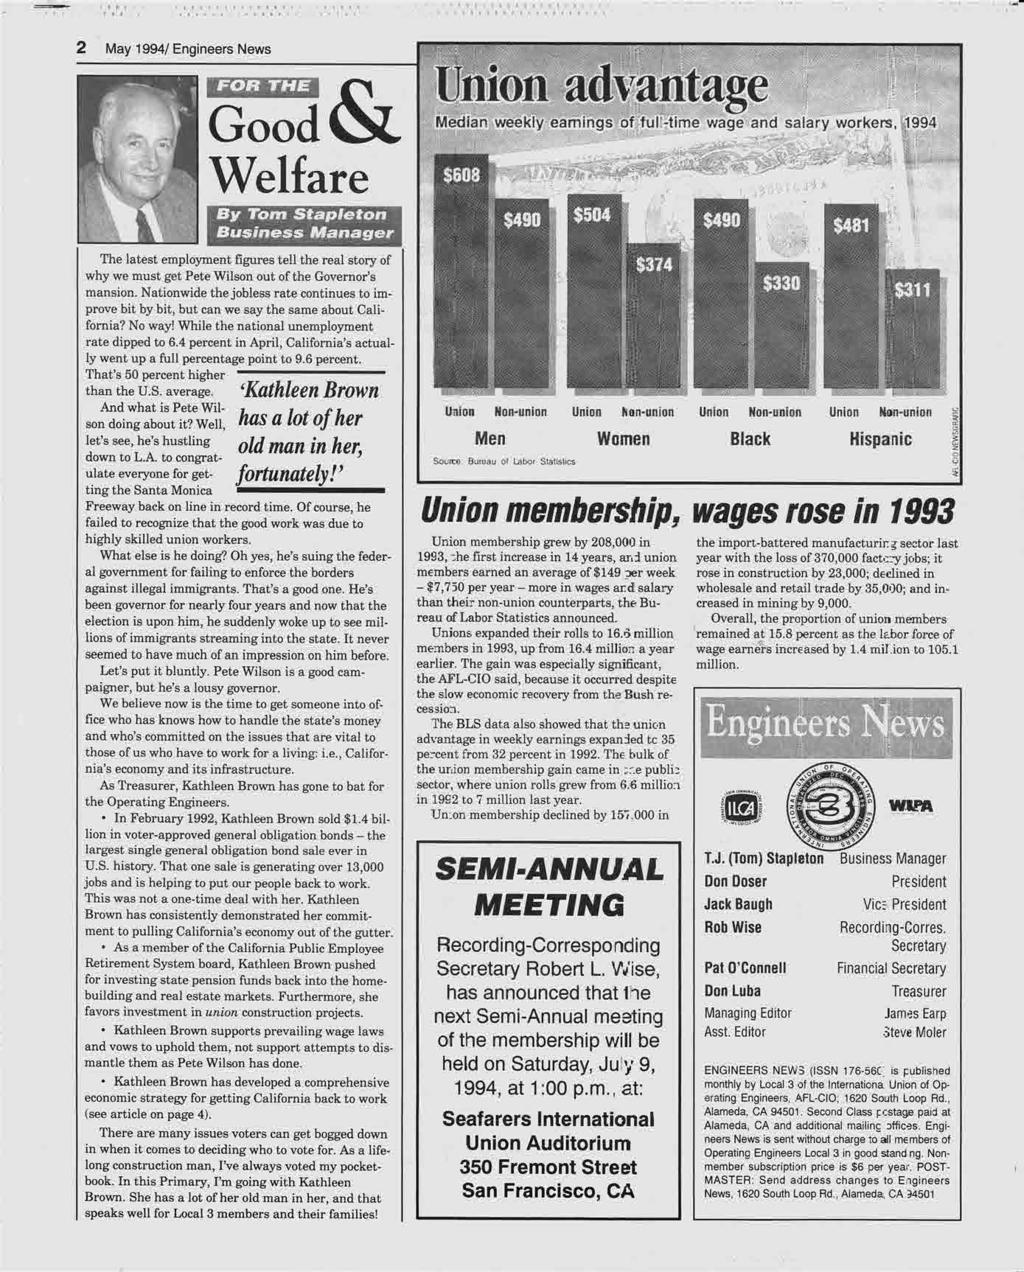 'll'' 'll/'',''',/'i.' ',\21'/4.6 2 May 1994/ Engineers News F < FOR THE Cy Union - 11 32 advantlige»- i d - 2 -*= Good Median weekly earnings of ful -time wage and salary workers, 1994 1 1~~C ~~.